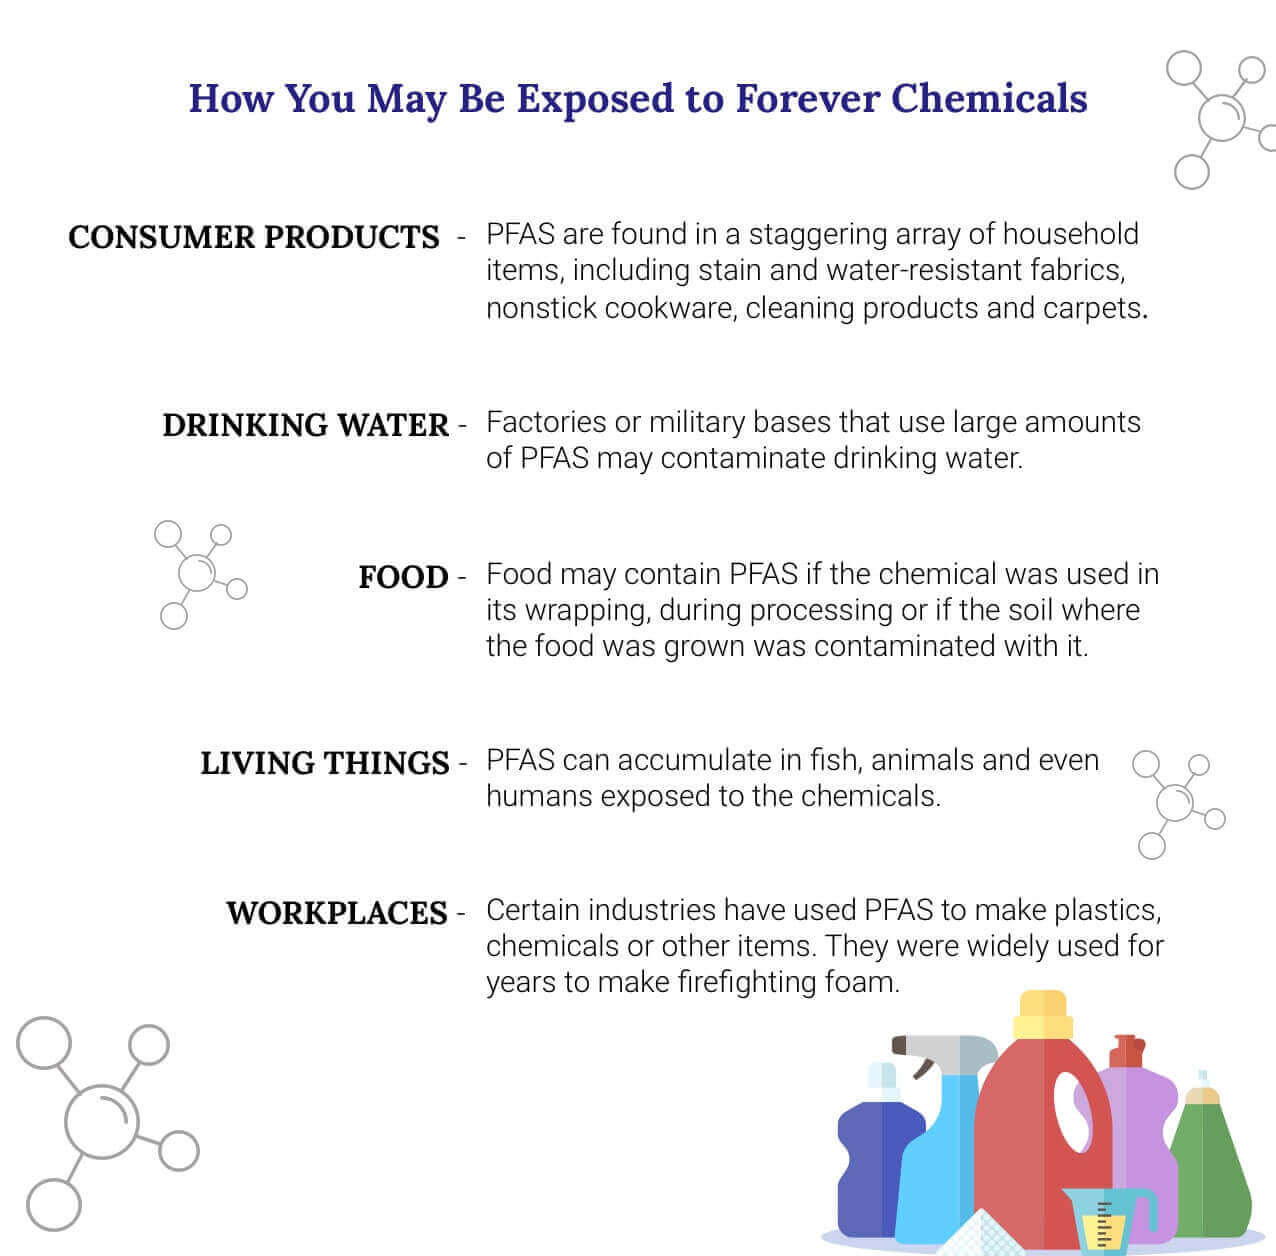 What Are Forever Chemicals and How Do We Deal With Them